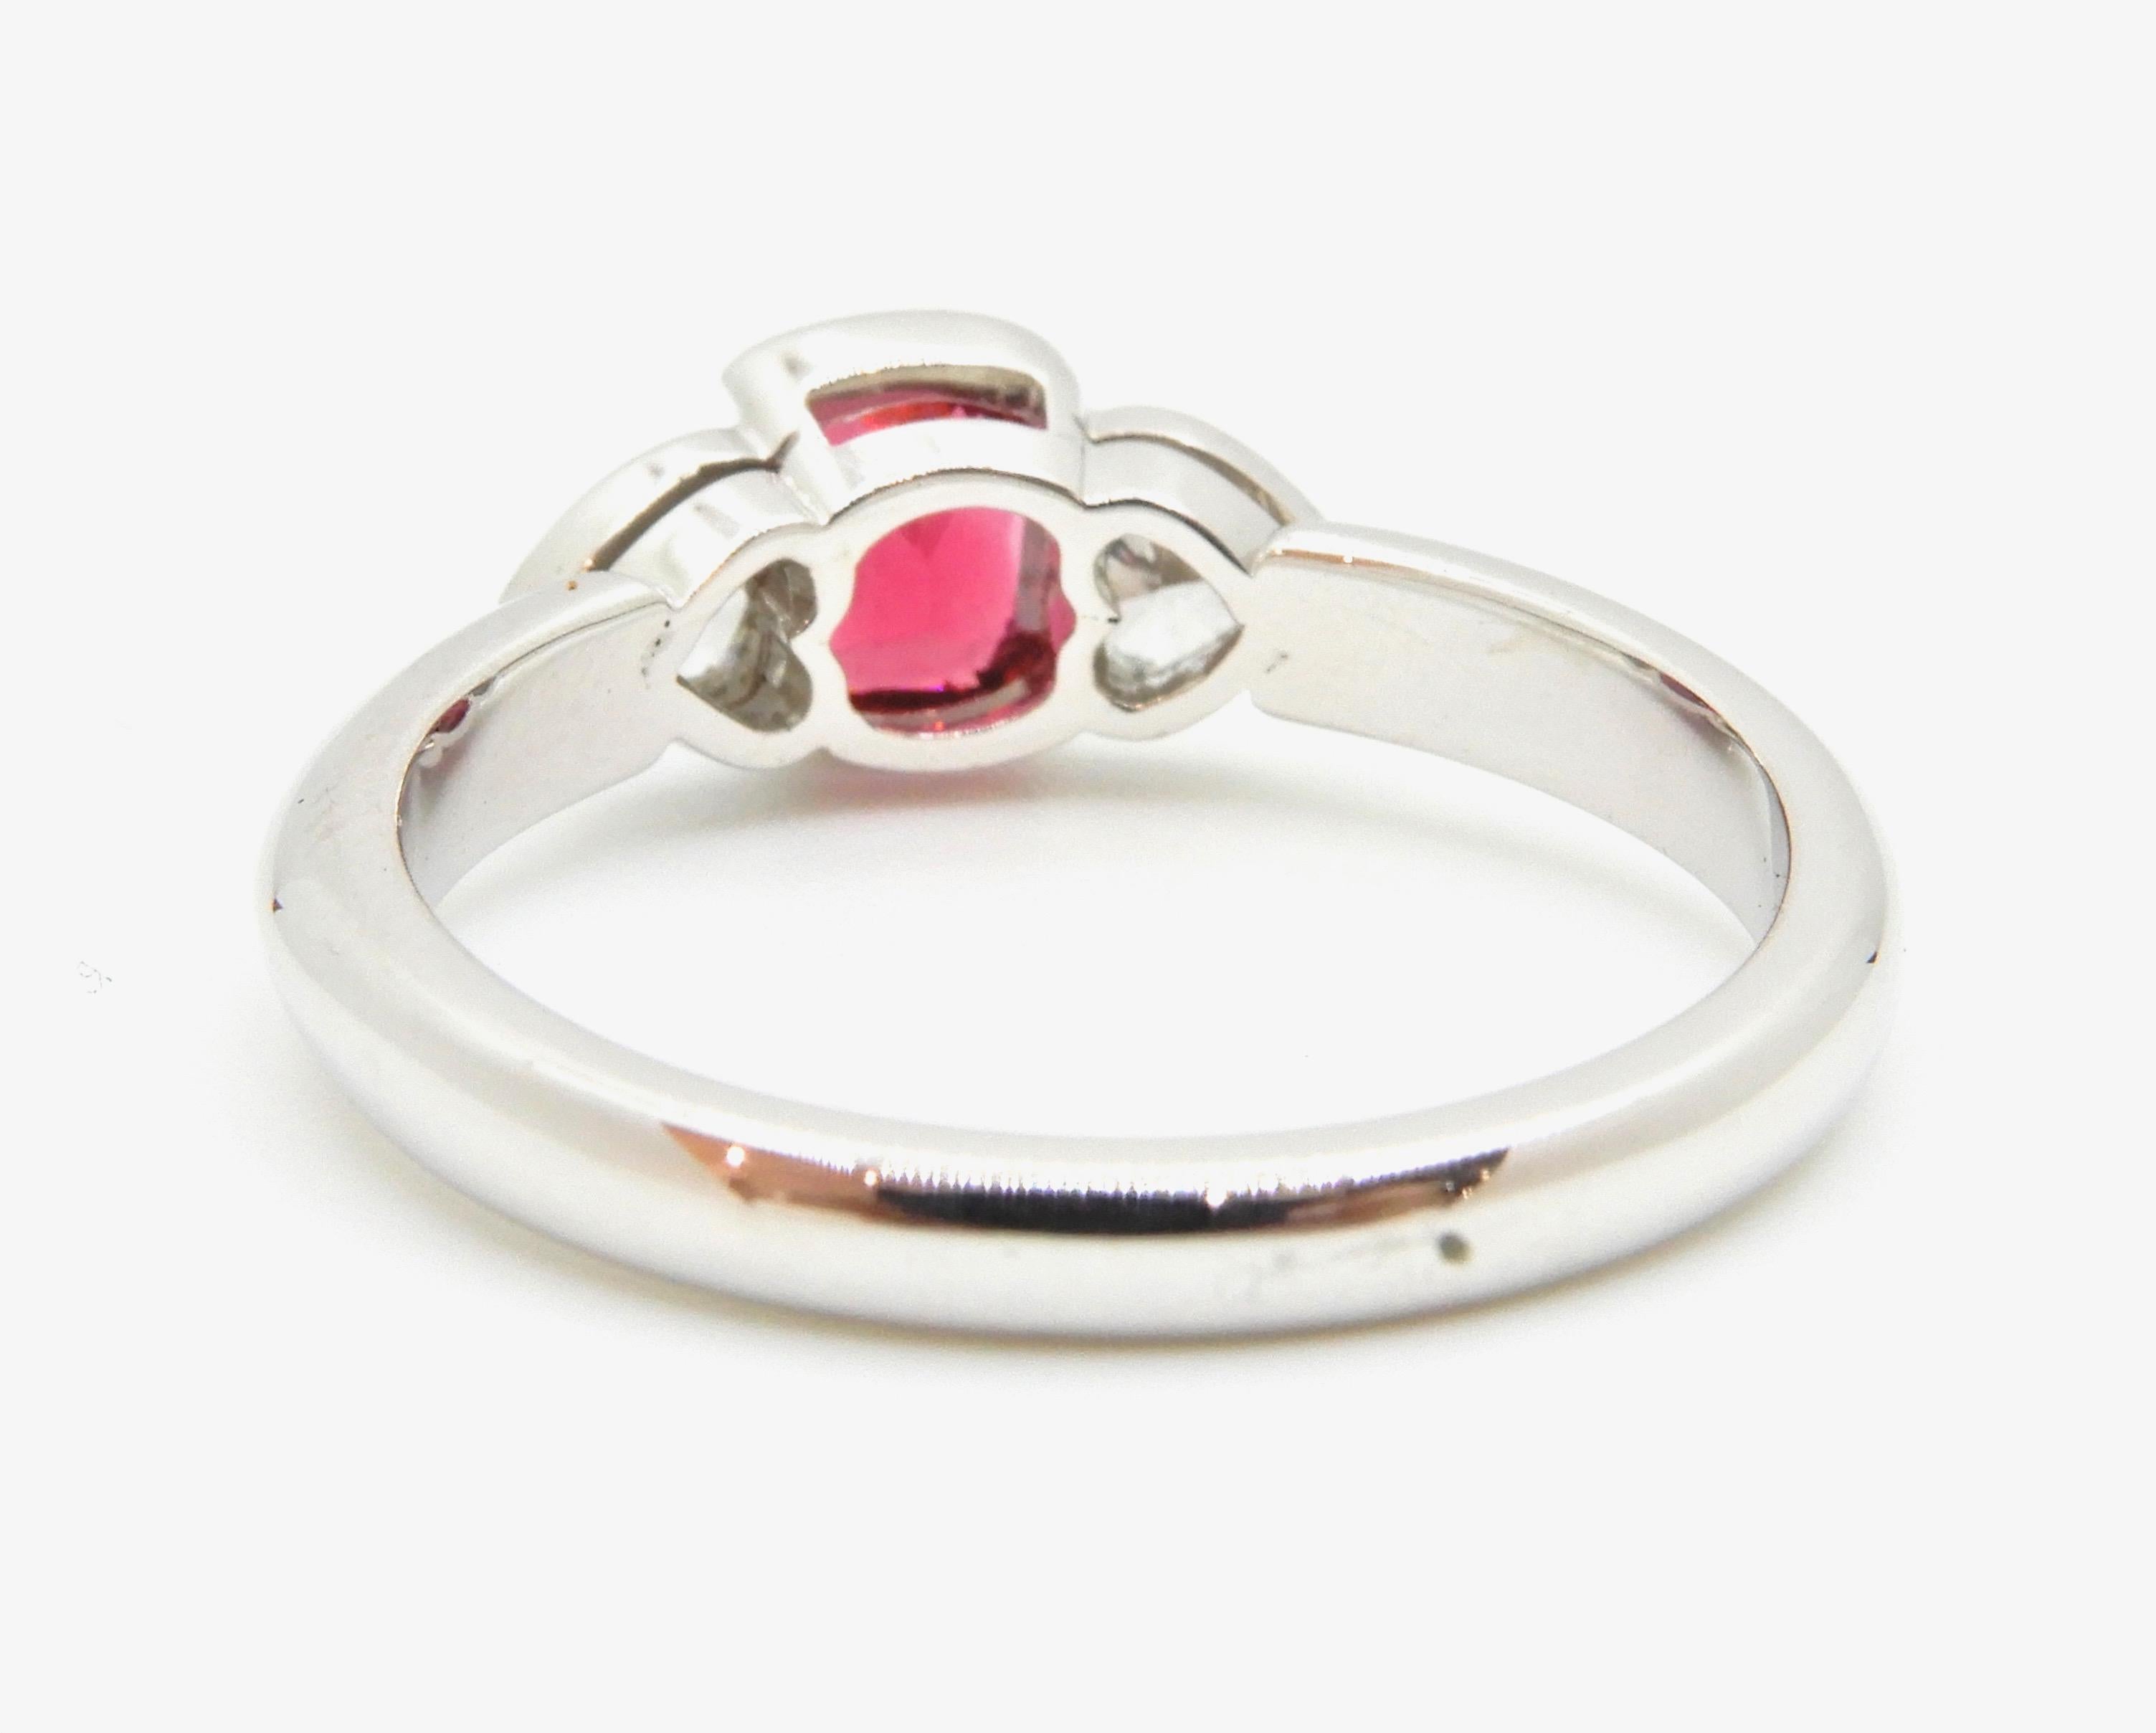 This amazing vivid coloured 0.89 carat faceted, cushion cut spinel red spinel takes centre stage in this Red Spinel and Heart Cut Diamond White Gold Handmade Three Stone Engagement Ring!

This sweet, handmade ring measures approximately 2.40mm and